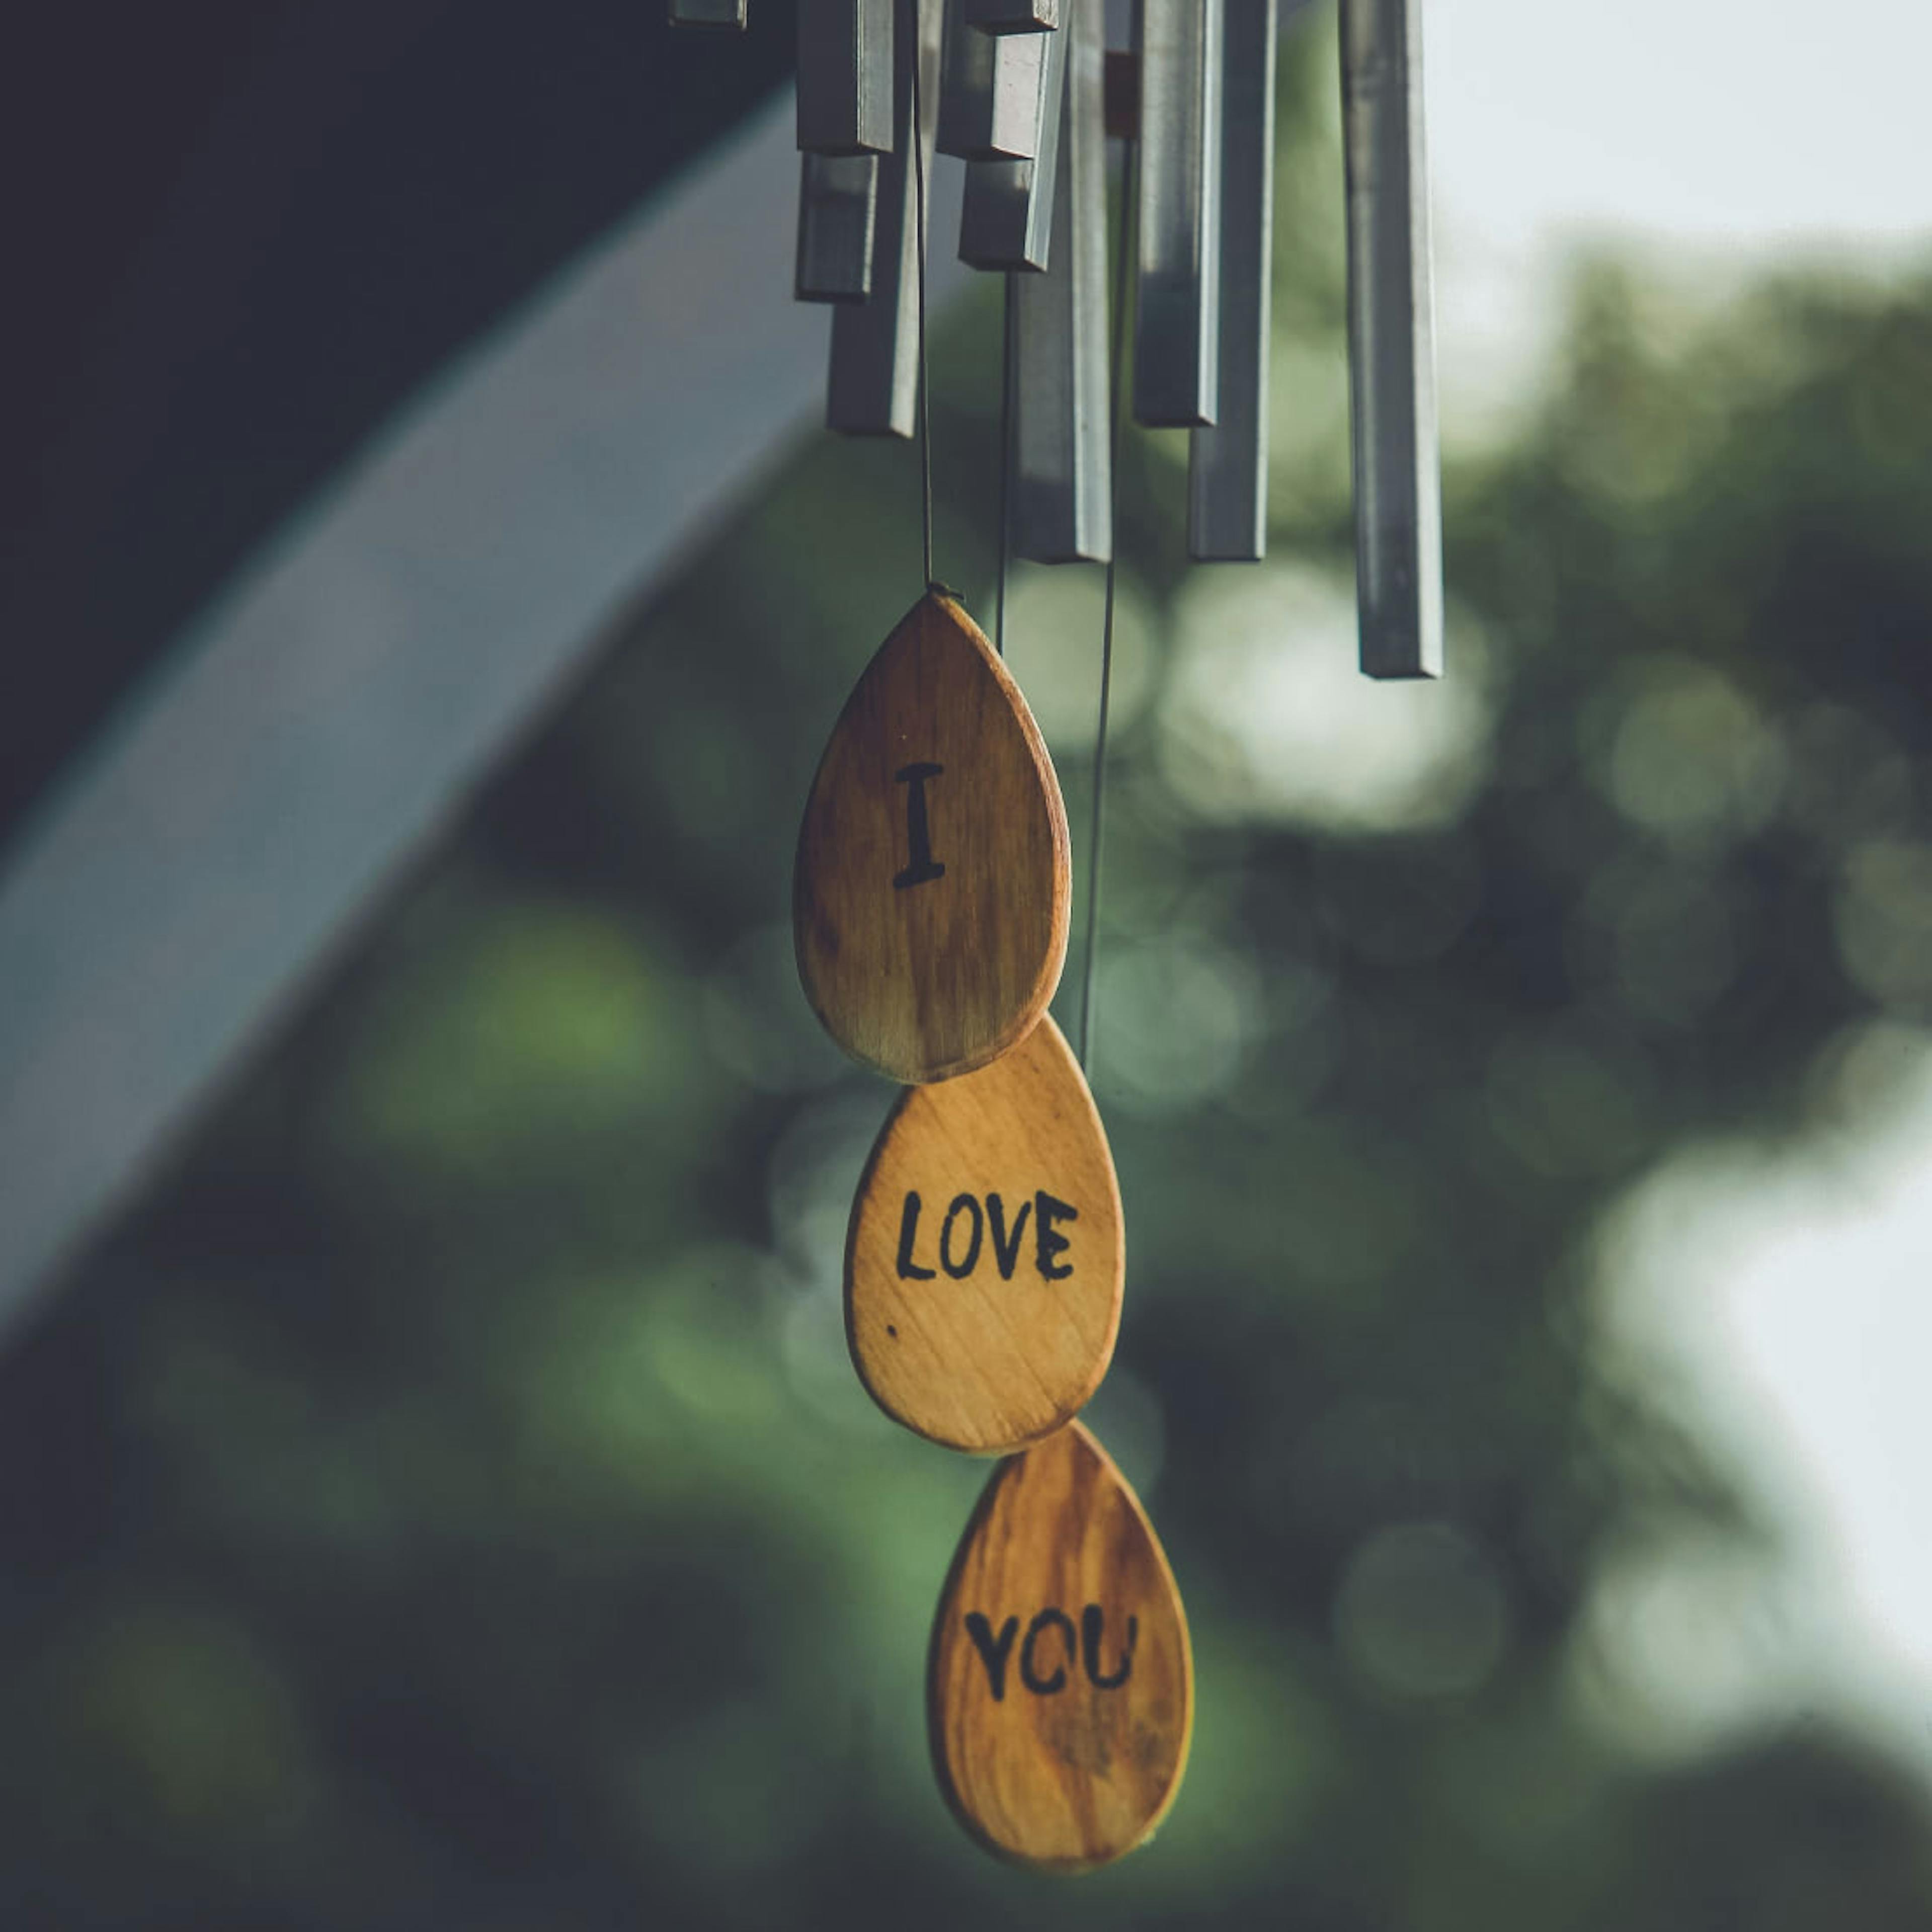 A wind chime gifted between friends that has the words "I love you" written on it.